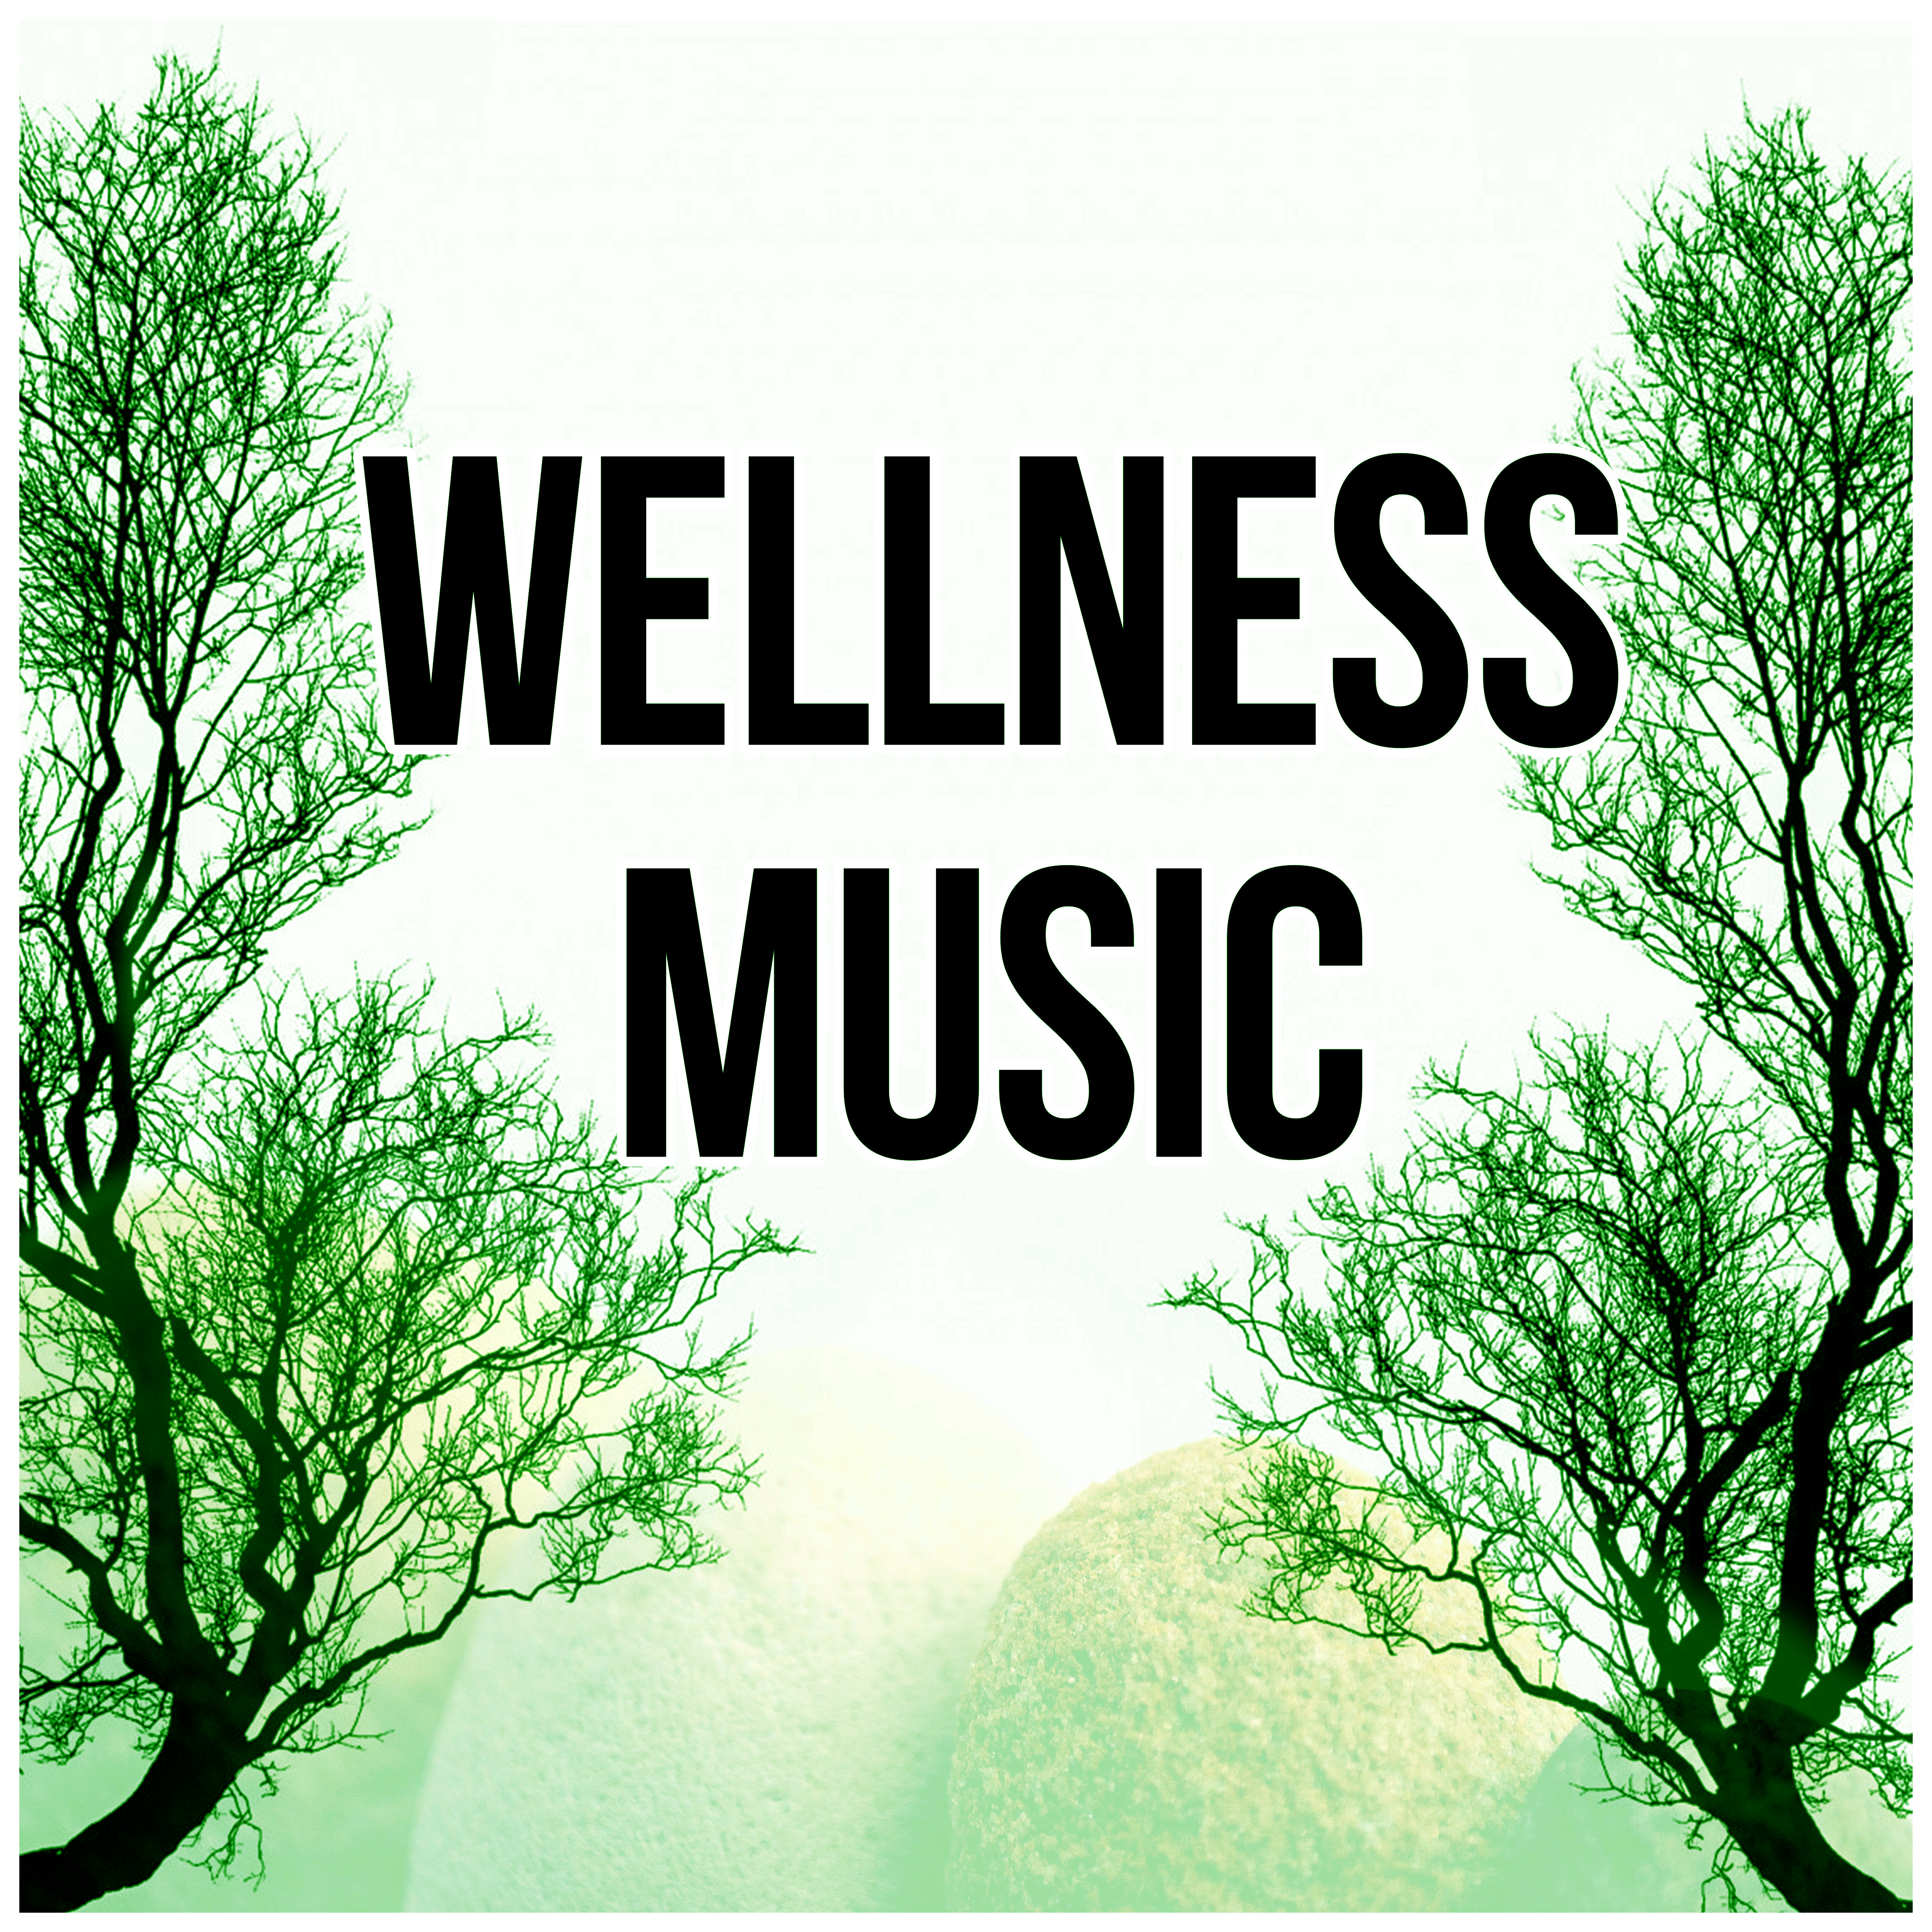 Wellness Music – Pure Massage, Waves, Spa, Nature Sounds, Wellness Spa, Music for Relaxation, Mind and Body Harmony, Ambient Music